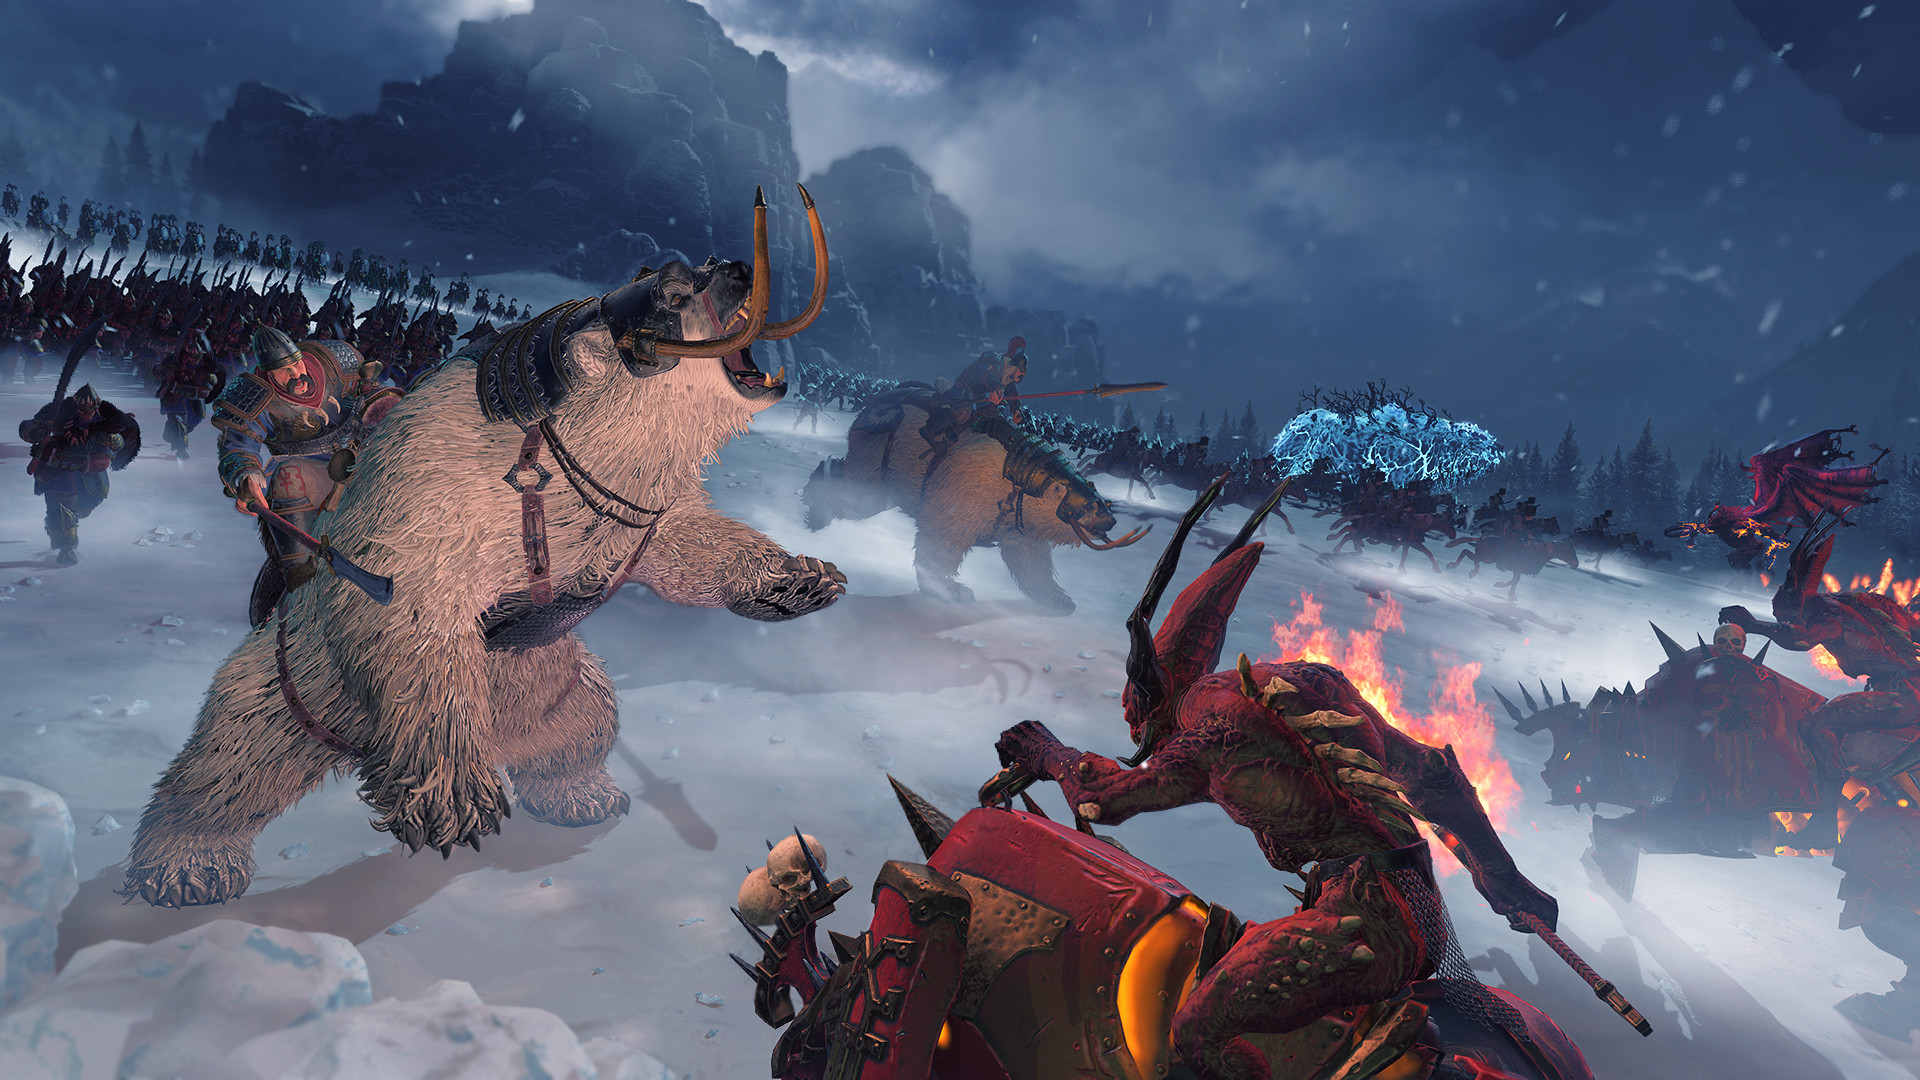 Total War: Warhammer III multiplayer trailer shows off its varied multiplayer modes